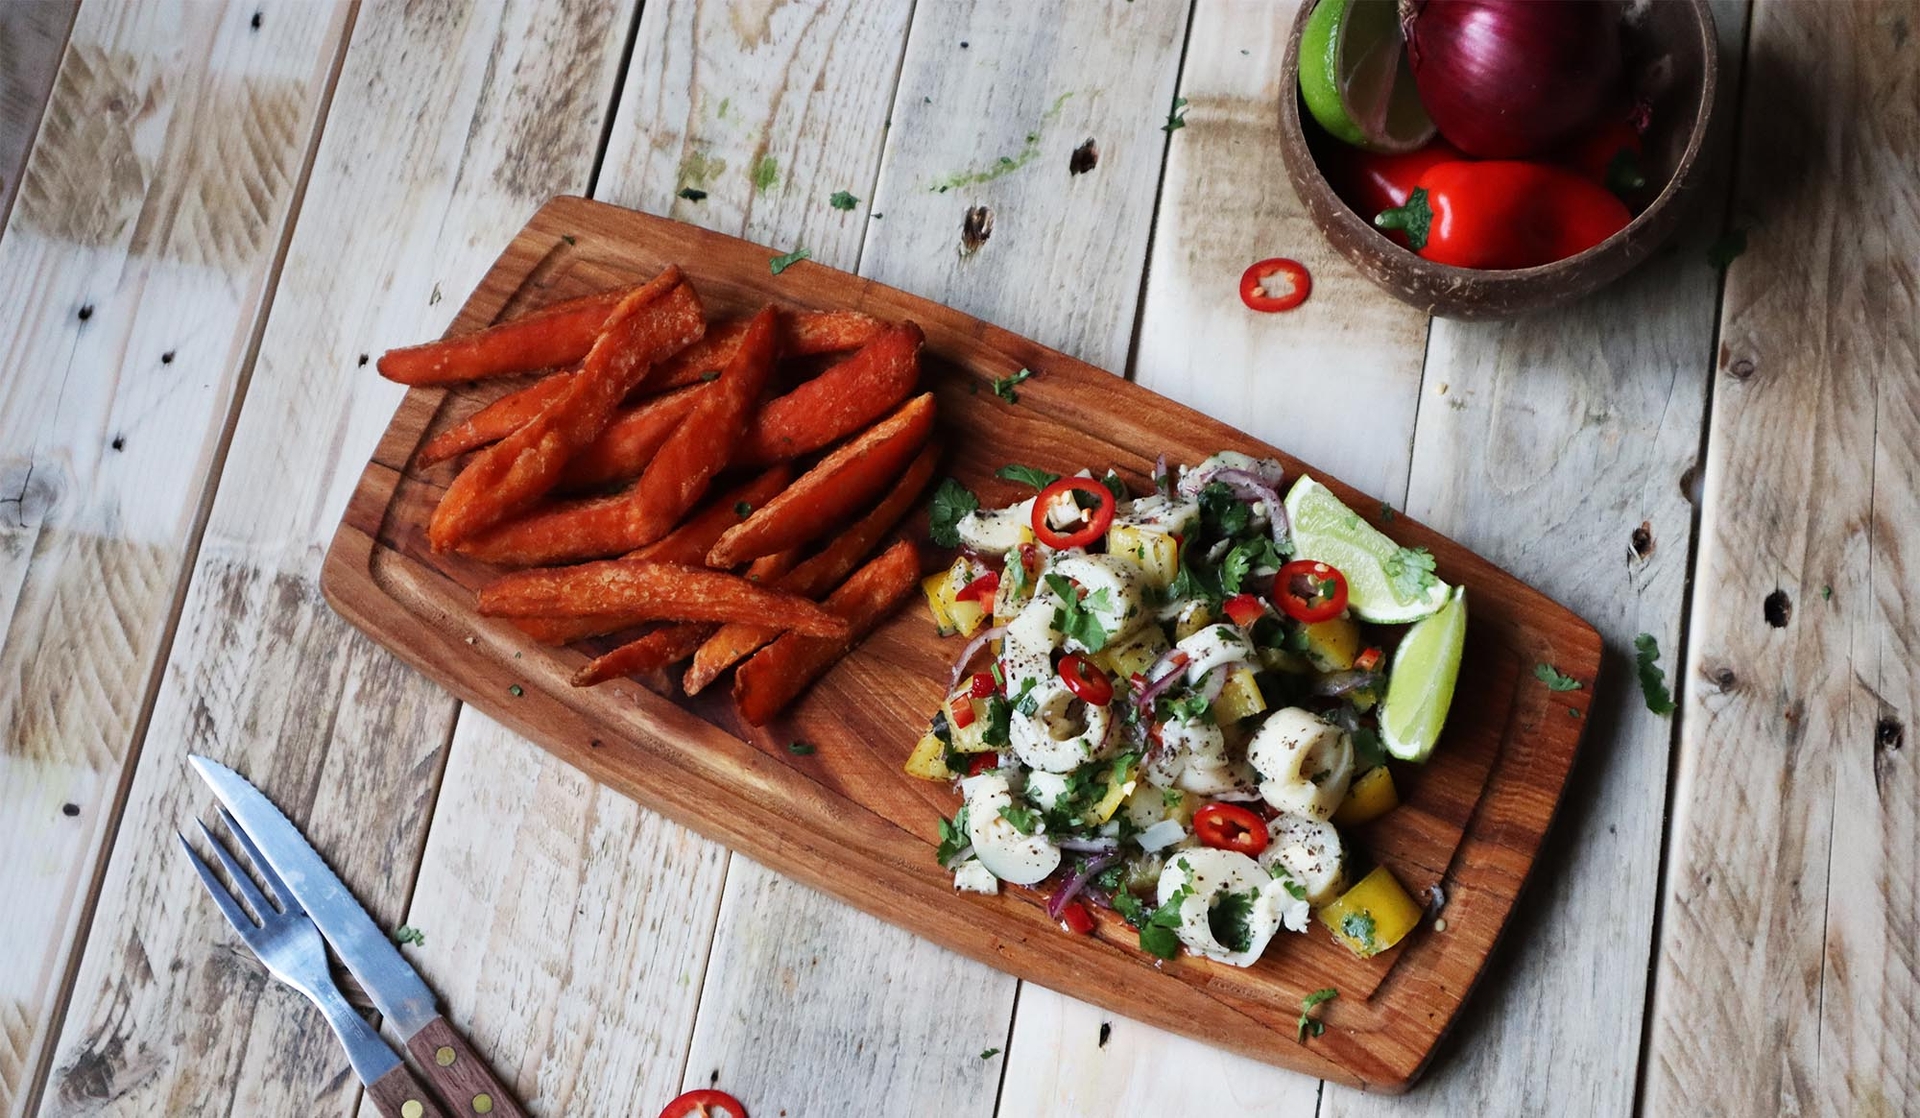 Vegan Ceviche with sweet potato wedges